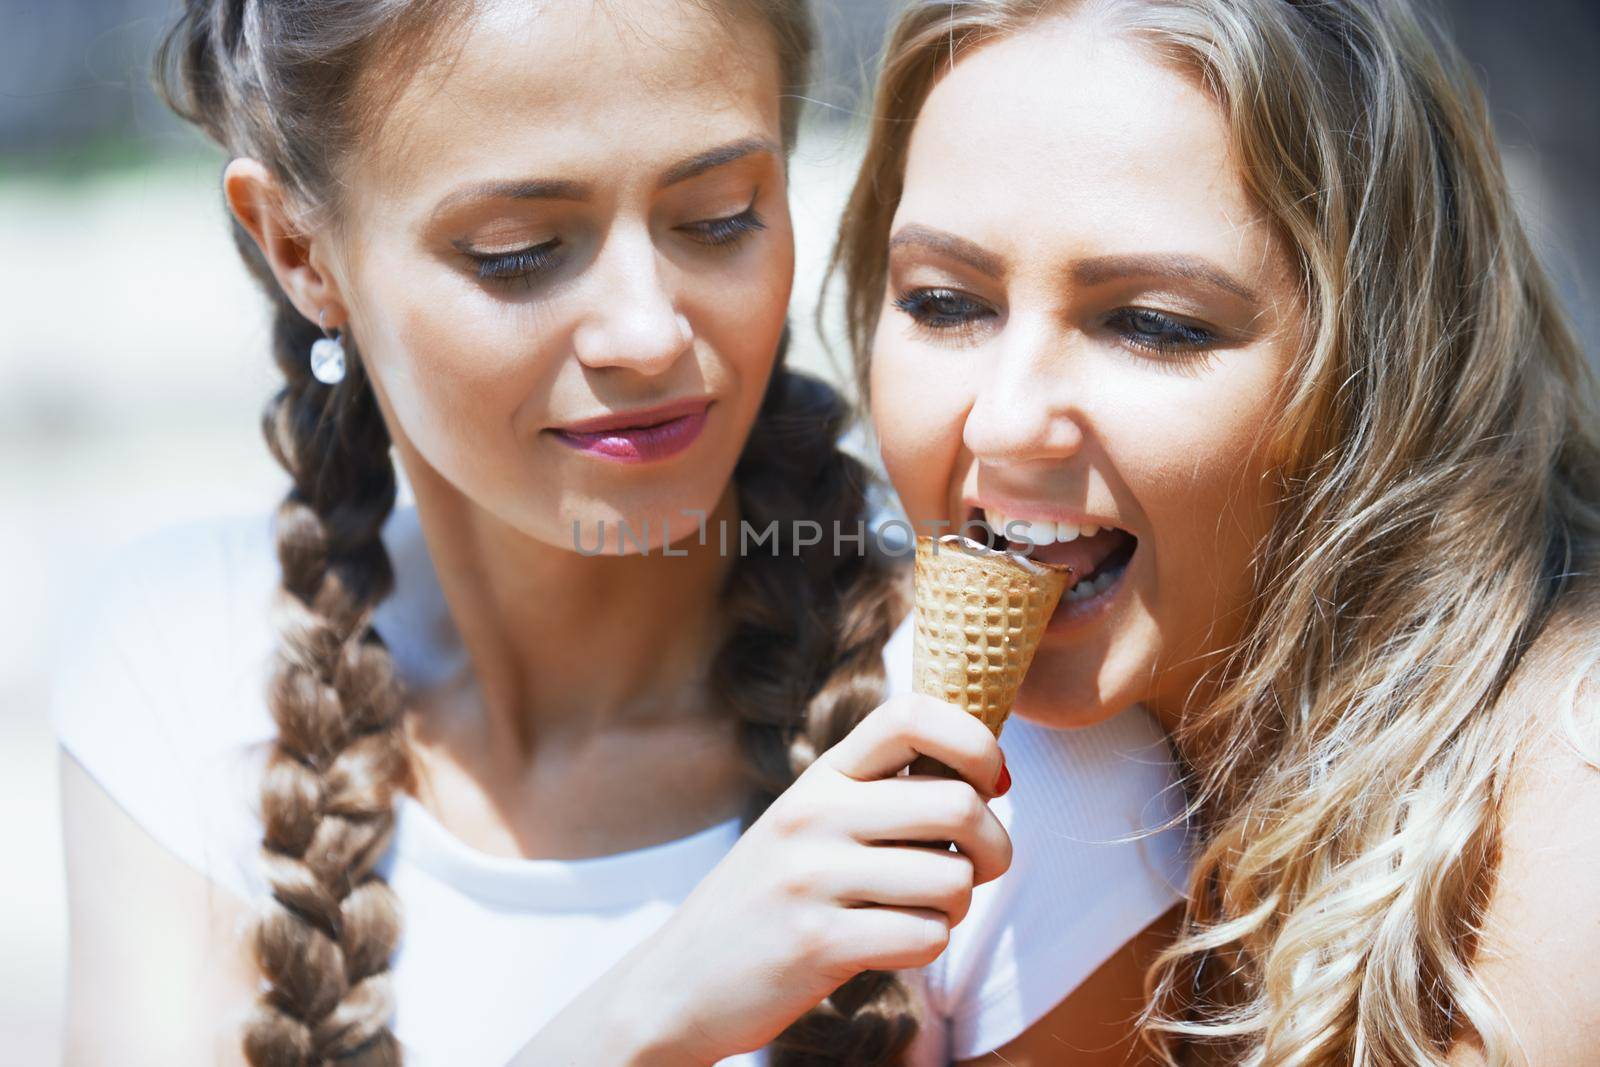 Girlfriends having fun together and eating ice cream